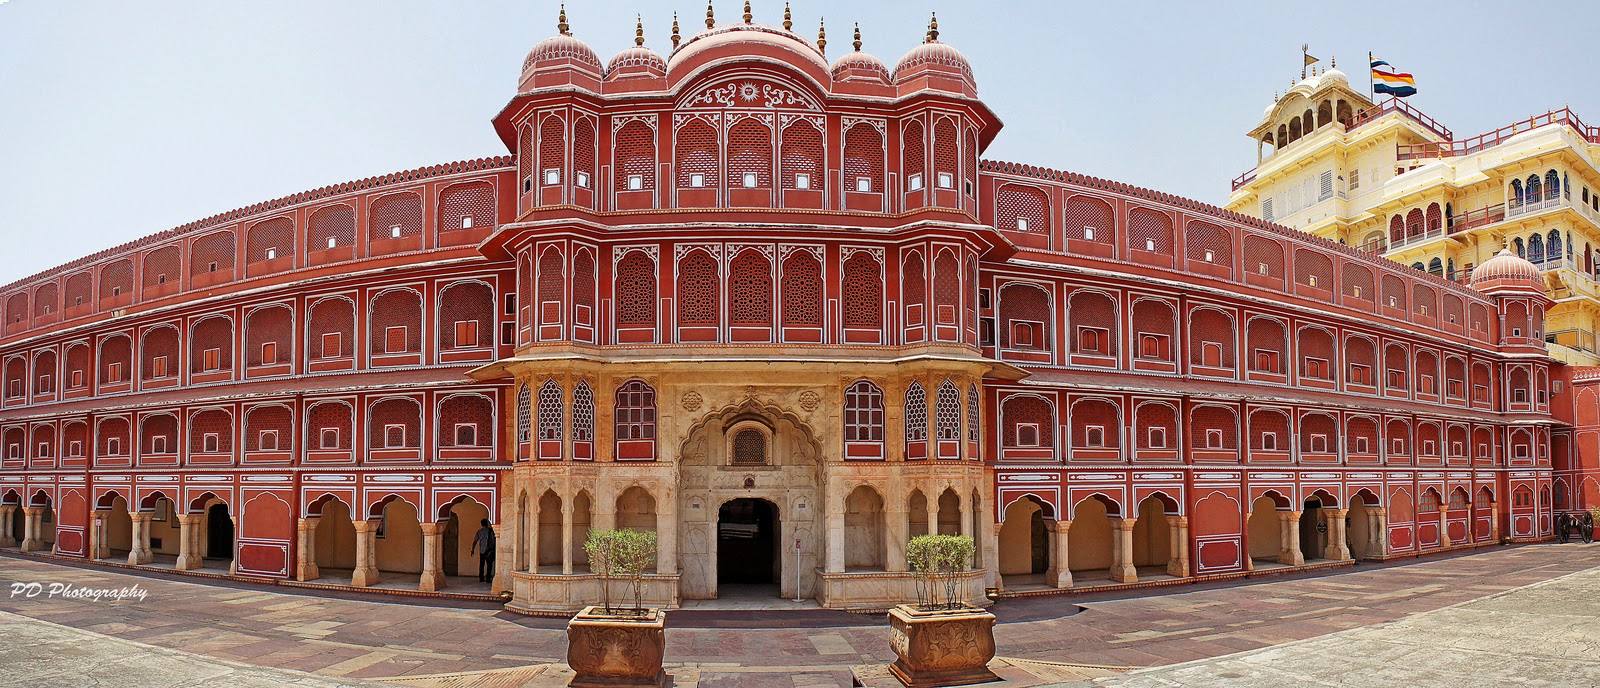 City Palace History Jaipur Rajasthan - Information about ...